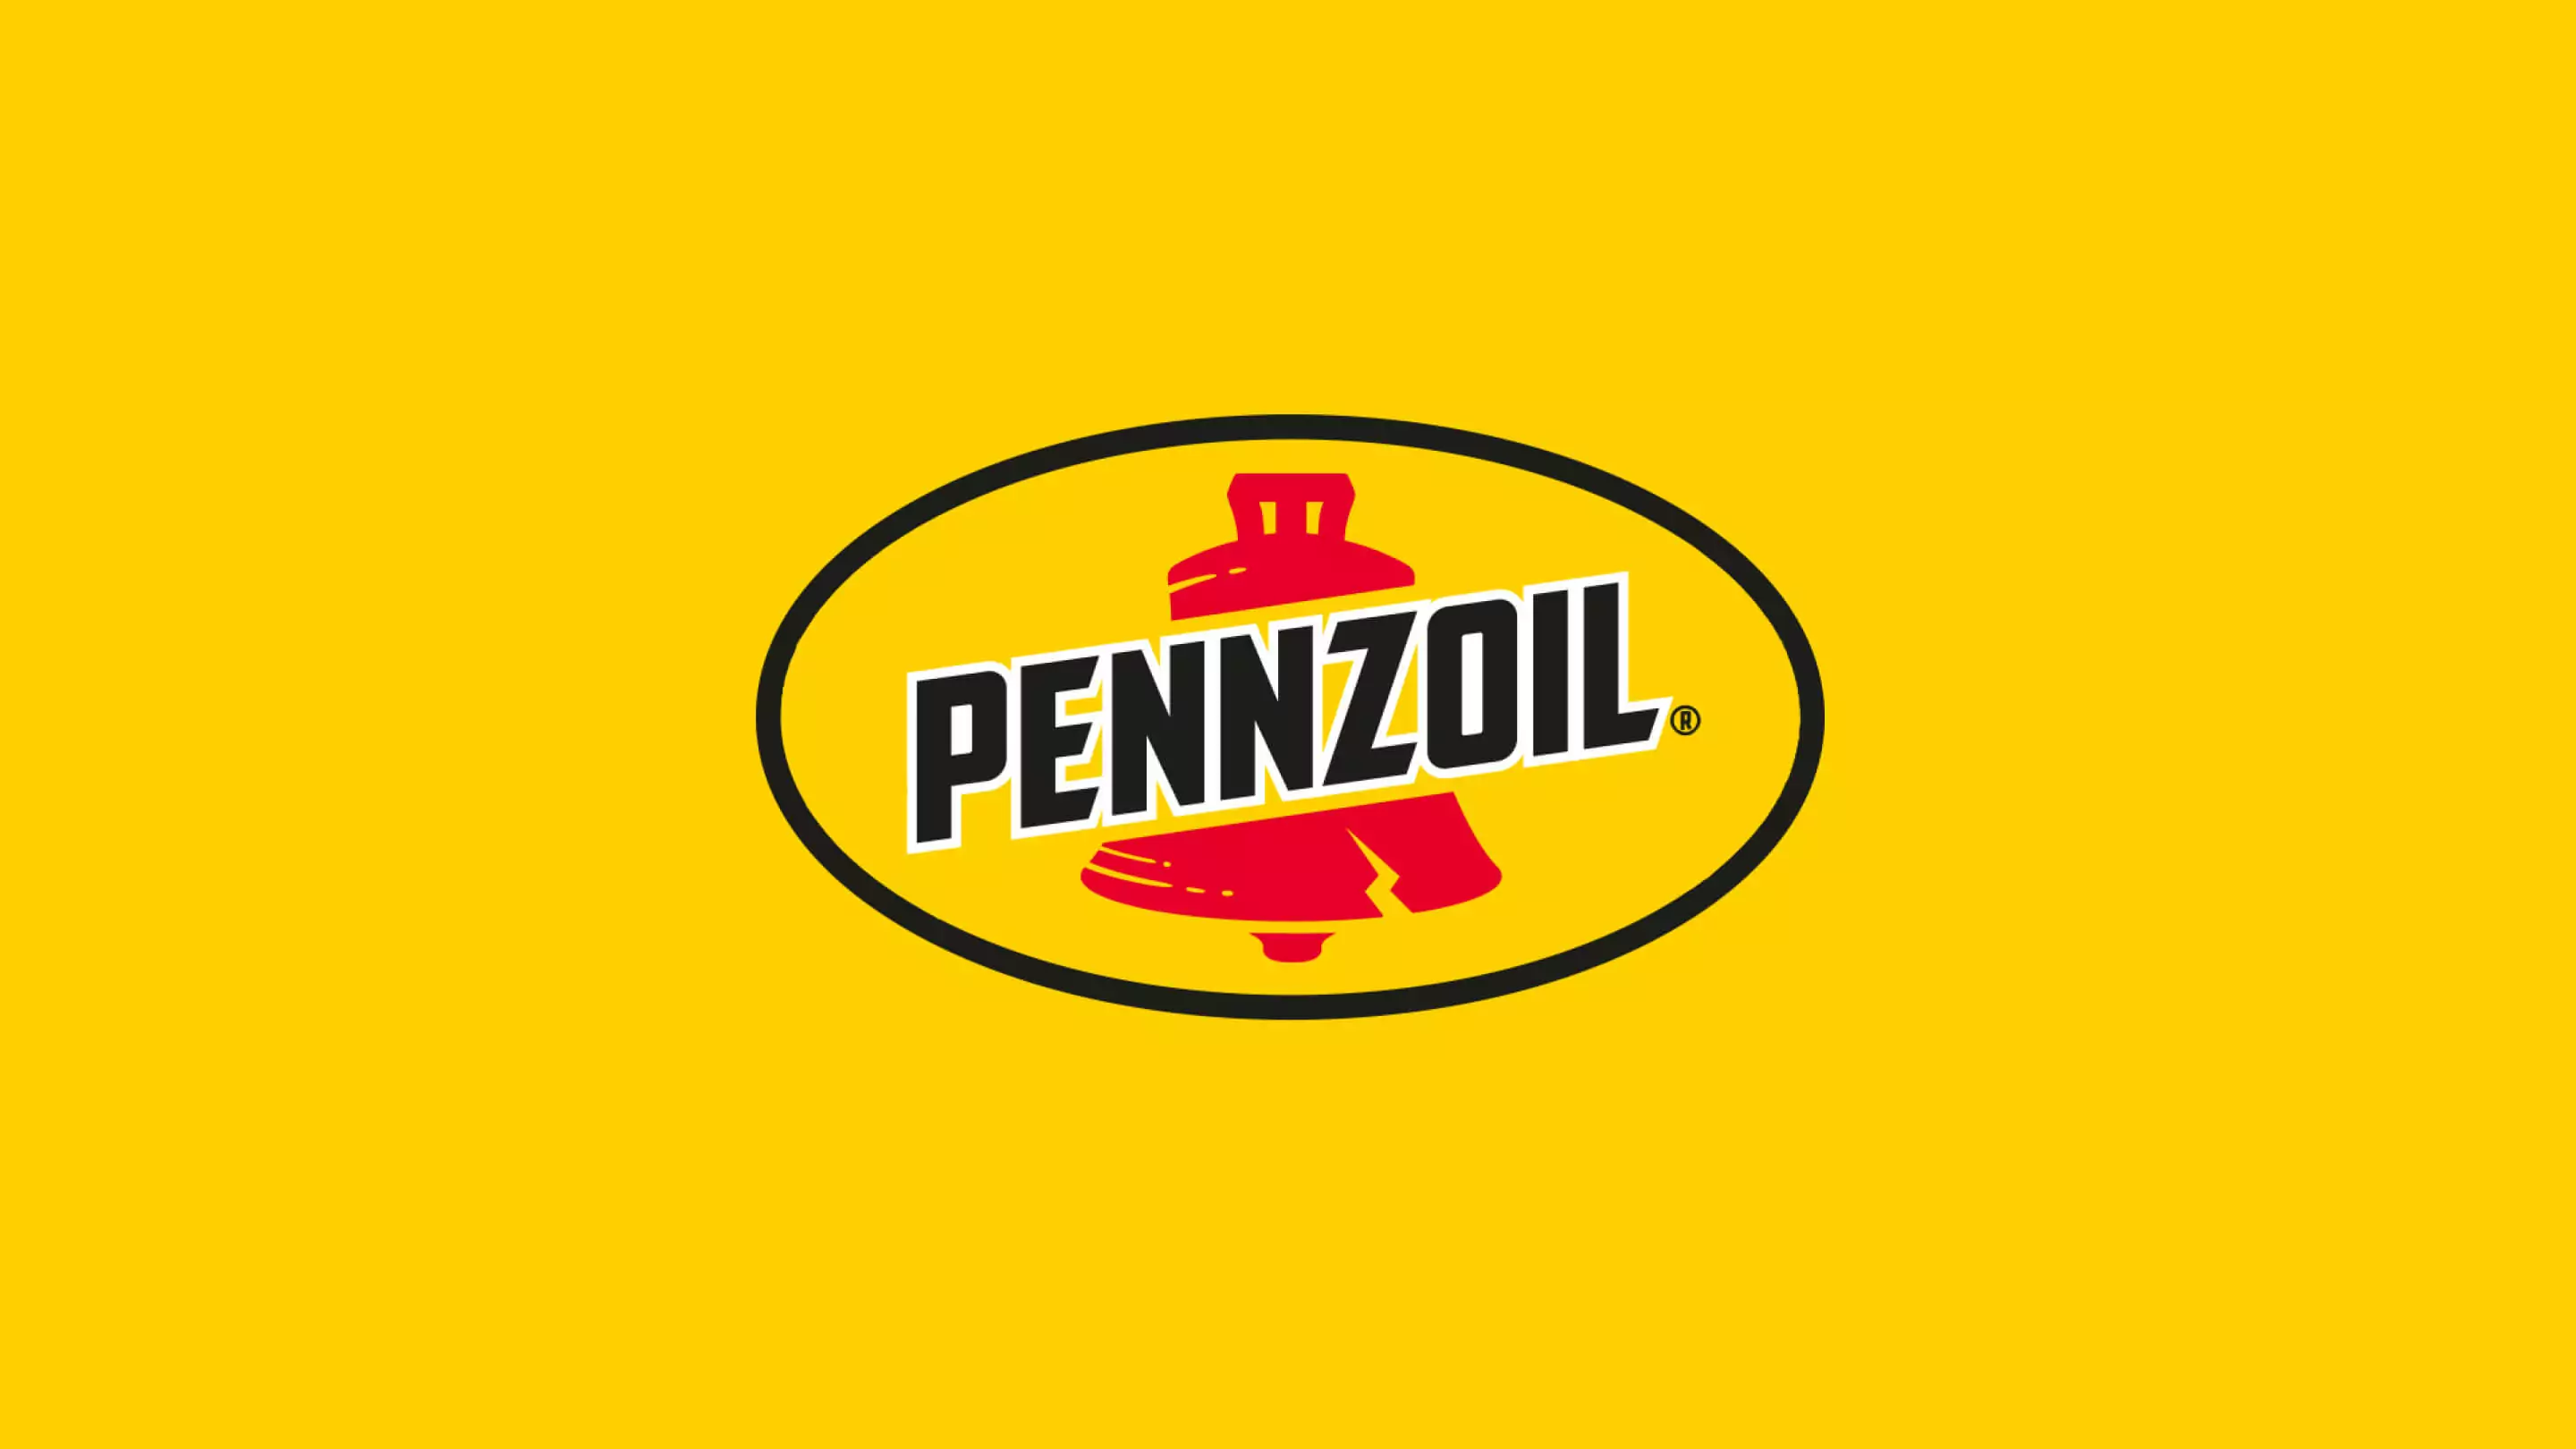 Pennzoil logo on a yellow background